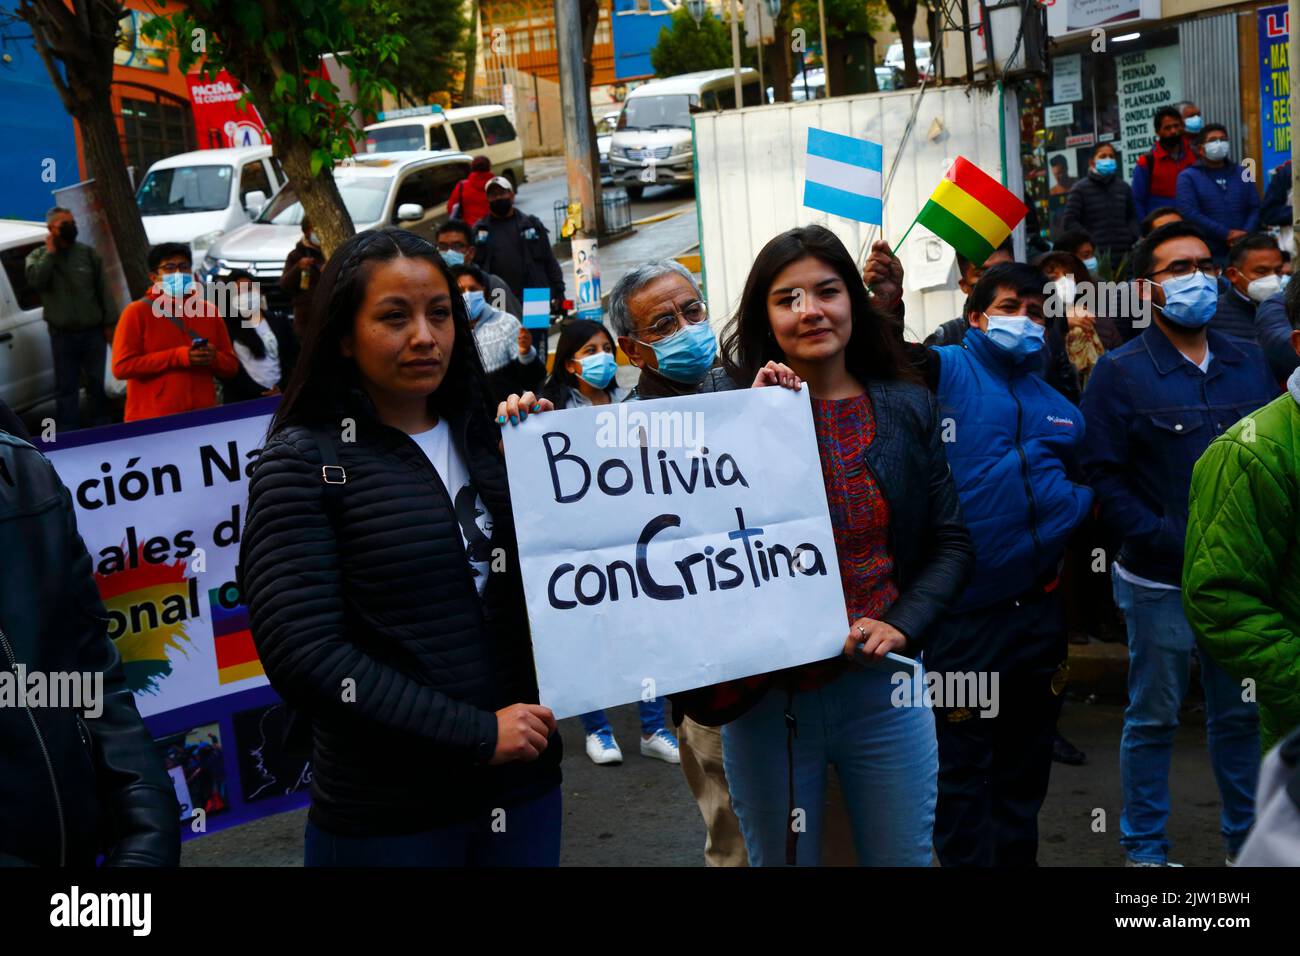 Sopocachi, La Paz, Bolivia, 2nd September 2022: 2 young women hold a placard saying 'Bolivia with Cristina' during an event outside the Argentine Embassy in La Paz to show support for Argentina's vice president Cristina Fernández de Kirchner, who narrowly survived an assassination attempt outside her home in Buenos Aires yesterday evening. Ms Fernández de Kirchner, who was also Argentina's president from 2007 to 2015, has been a longstanding ally of Bolivia's left-wing goverment and ruling MAS Party. Stock Photo